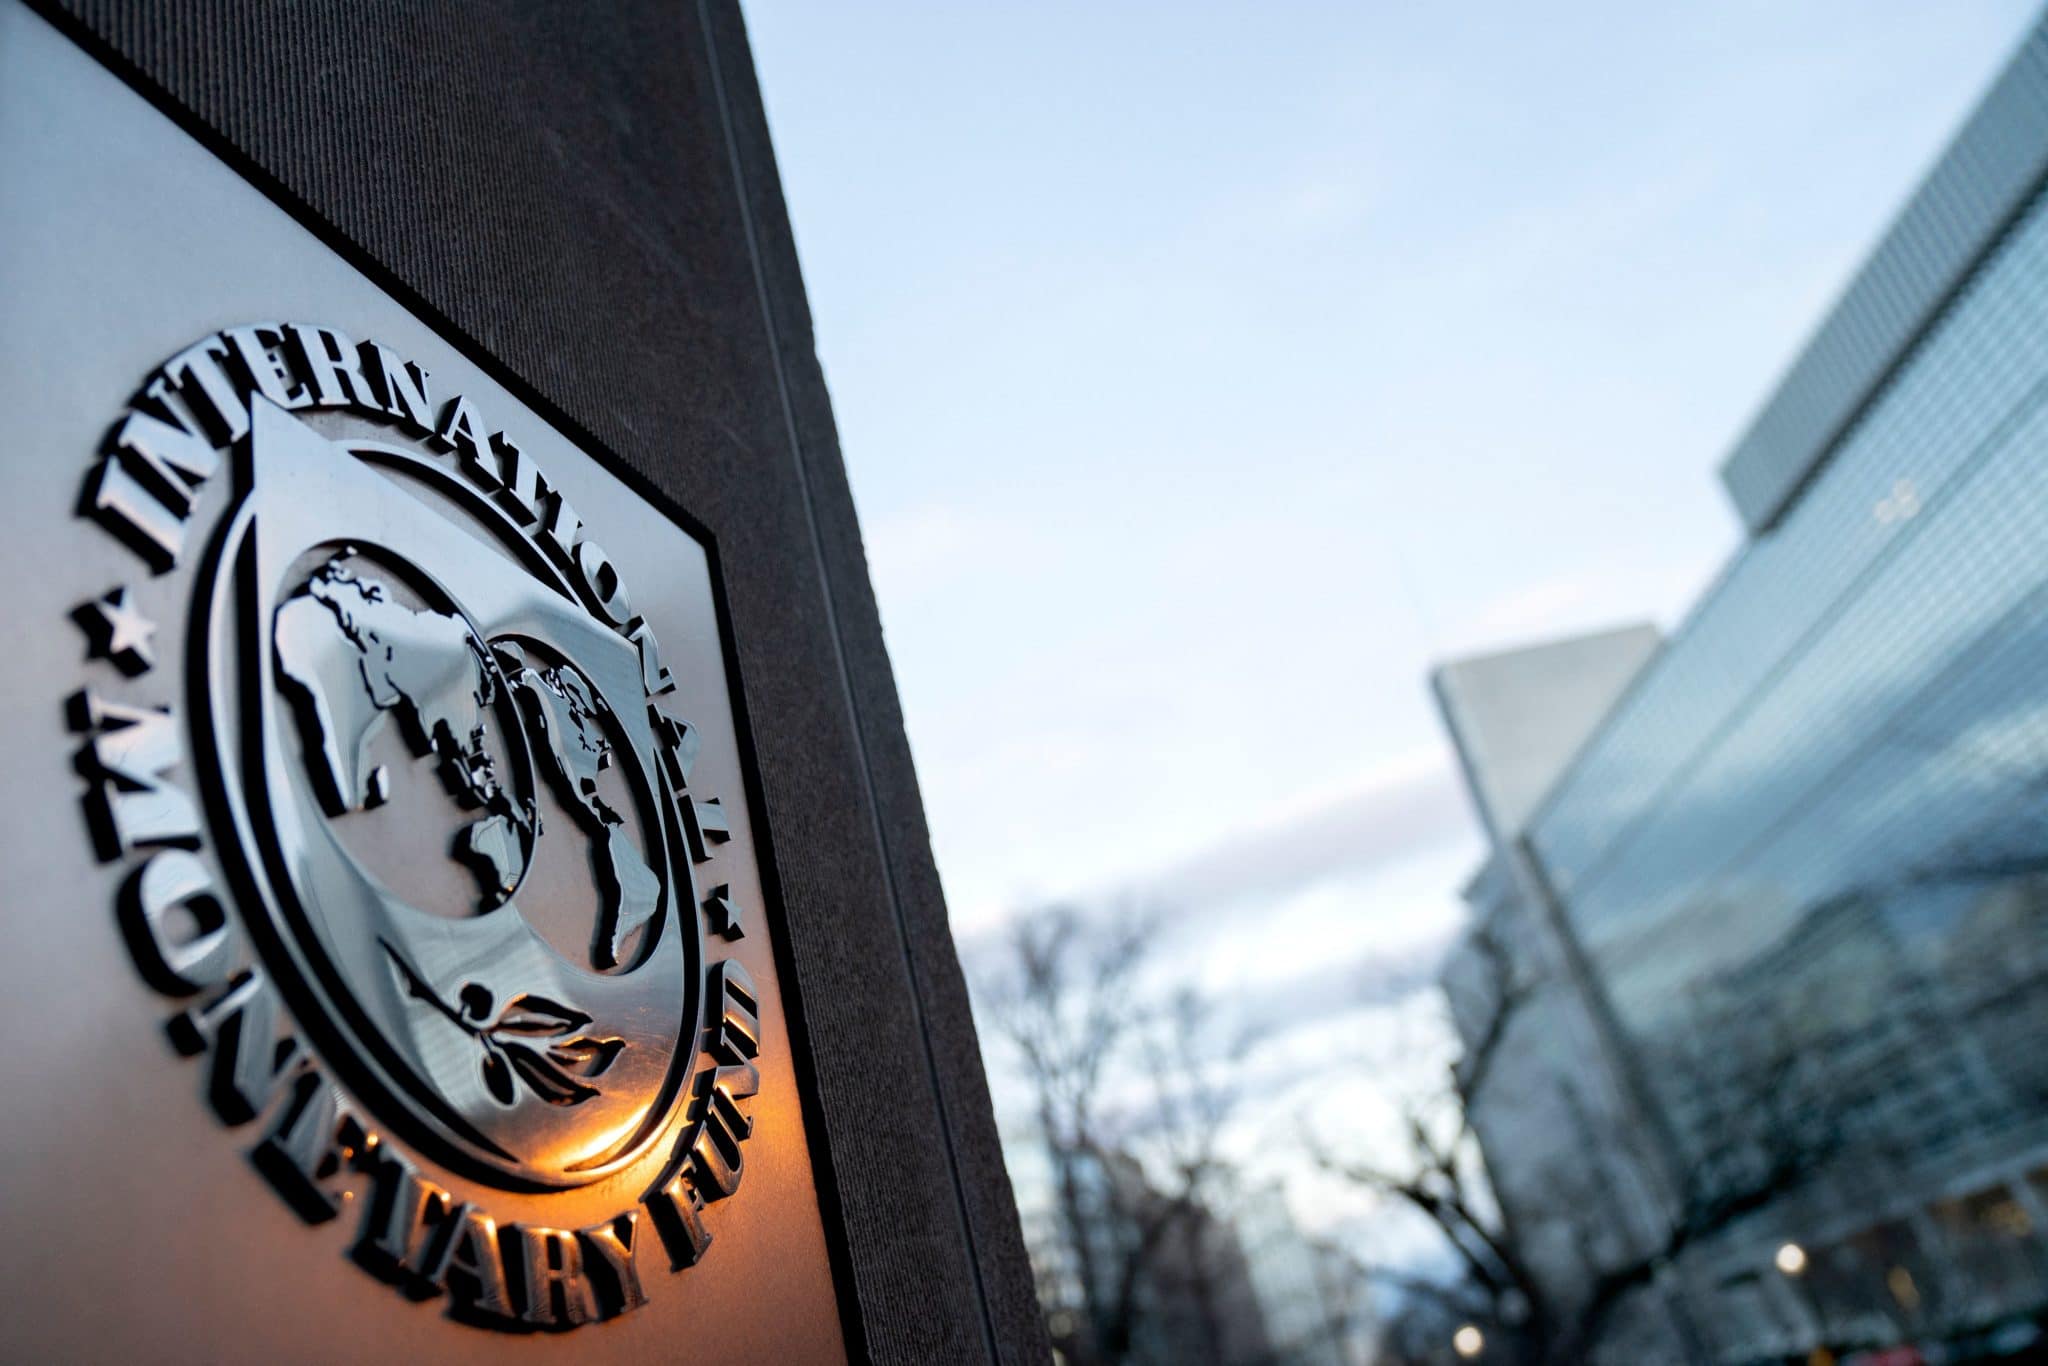 IMF anticipates no further relief needed for Zambia post-debt programme